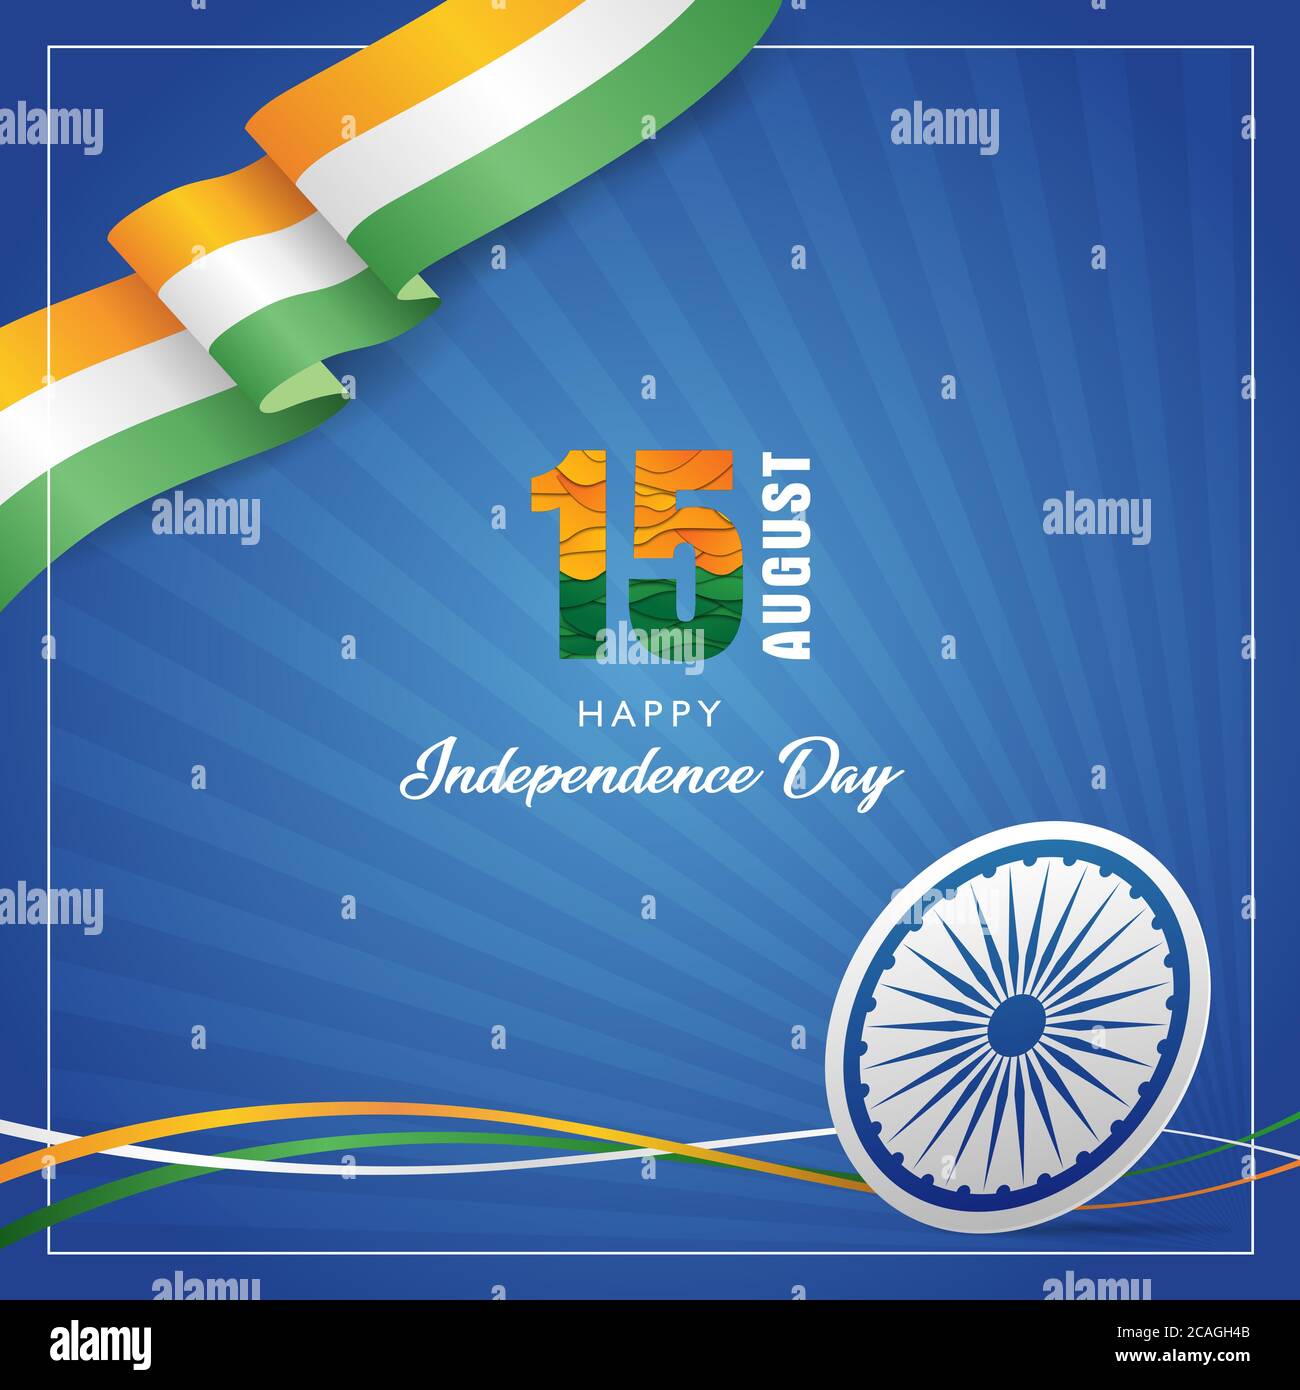 Indian Independence Day Attractive Wallpaper Banner with Ashoka wheel, National Indian Flag Tricolours wave on Square size Radial Gradient Blue Backgr Stock Vector